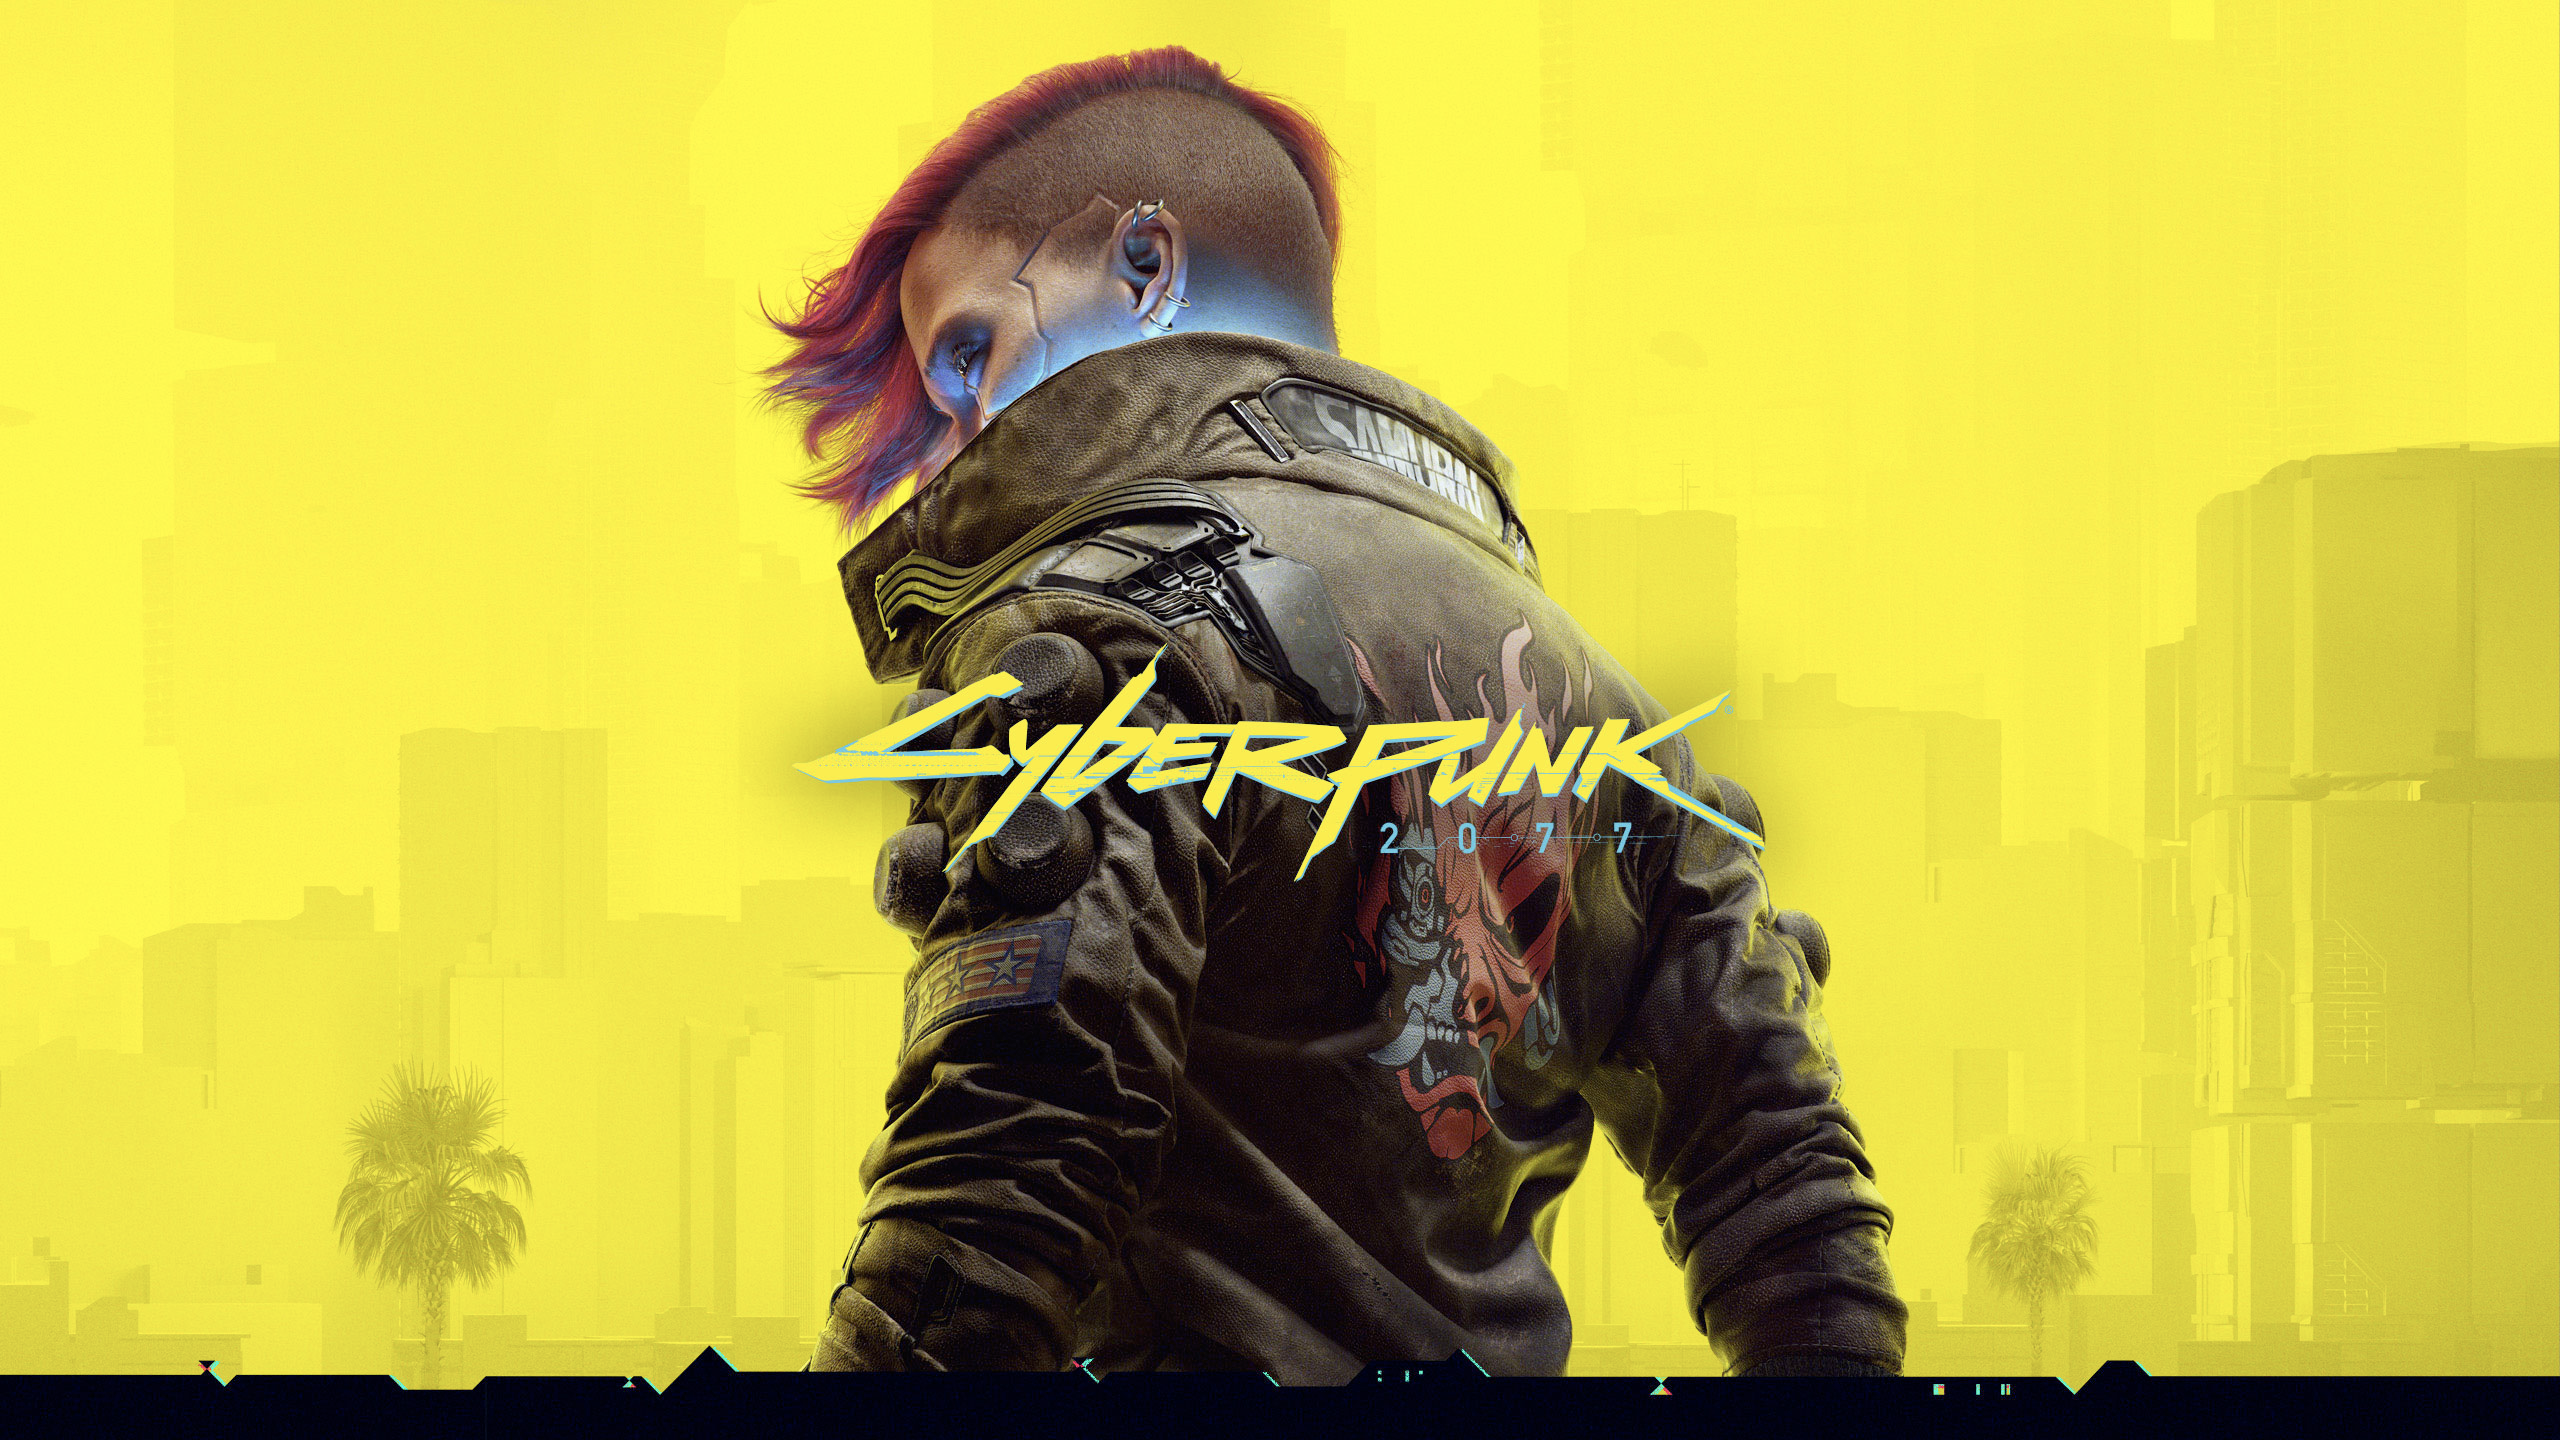 **[Cyberpunk 2077](https://www.metacritic.com/game/pc/cyberpunk-2077)** was the first game I played on my new PS5 and I absolutely loved it. Highly recommended if you like SciFi and shooter games.